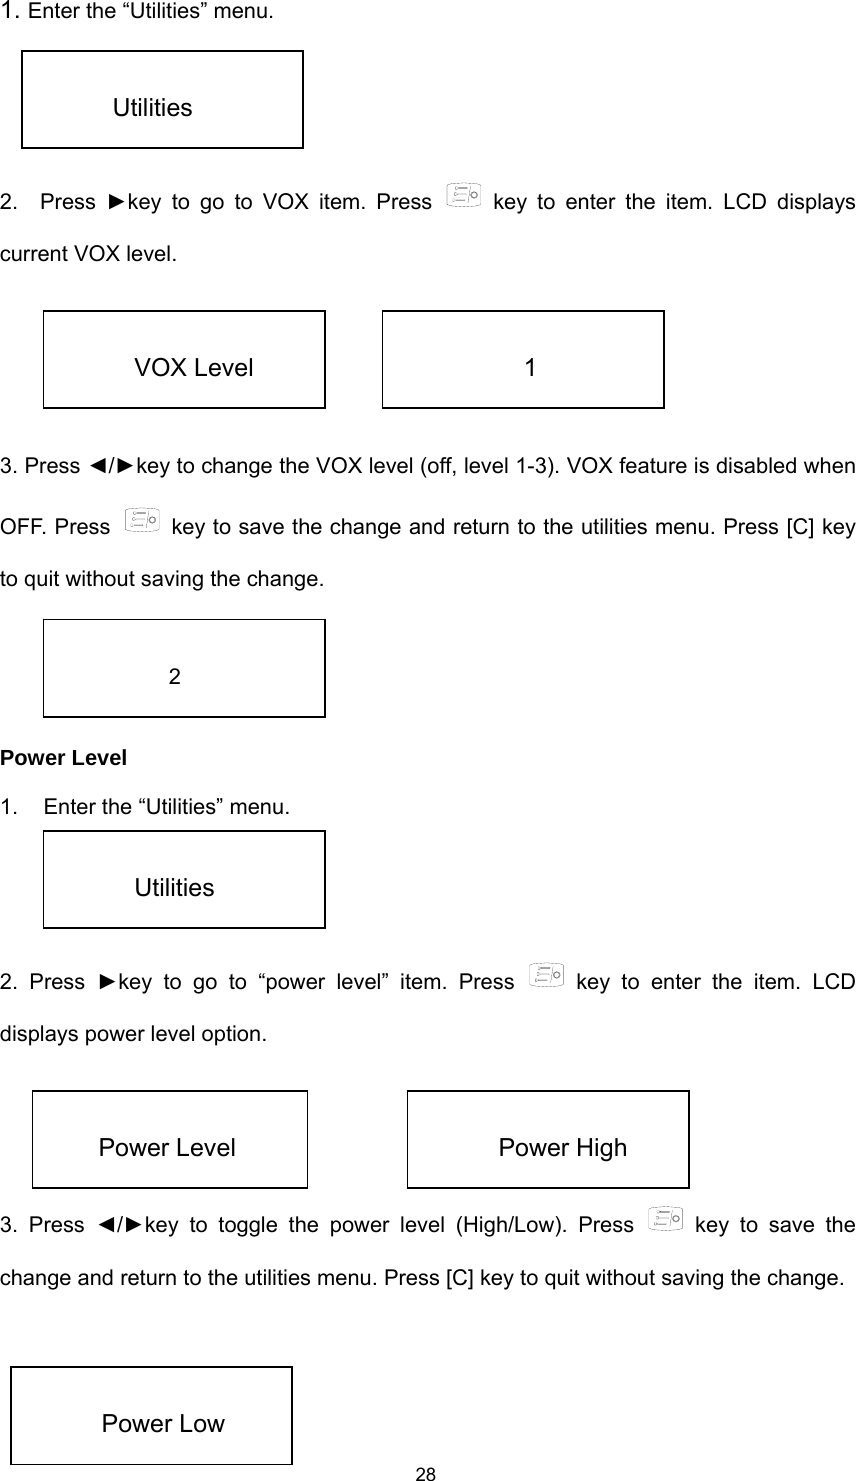  281. Enter the “Utilities” menu.   2.  Press ►key to go to VOX item. Press   key to enter the item. LCD displays current VOX level.      3. Press ◄/►key to change the VOX level (off, level 1-3). VOX feature is disabled when OFF. Press    key to save the change and return to the utilities menu. Press [C] key to quit without saving the change.     Power Level 1.  Enter the “Utilities” menu.   2. Press ►key to go to “power level” item. Press   key to enter the item. LCD displays power level option.     3. Press ◄/►key to toggle the power level (High/Low). Press   key to save the change and return to the utilities menu. Press [C] key to quit without saving the change.      Utilities  VOX Level  1  2  Utilities  Power Level  Power High  Power Low 